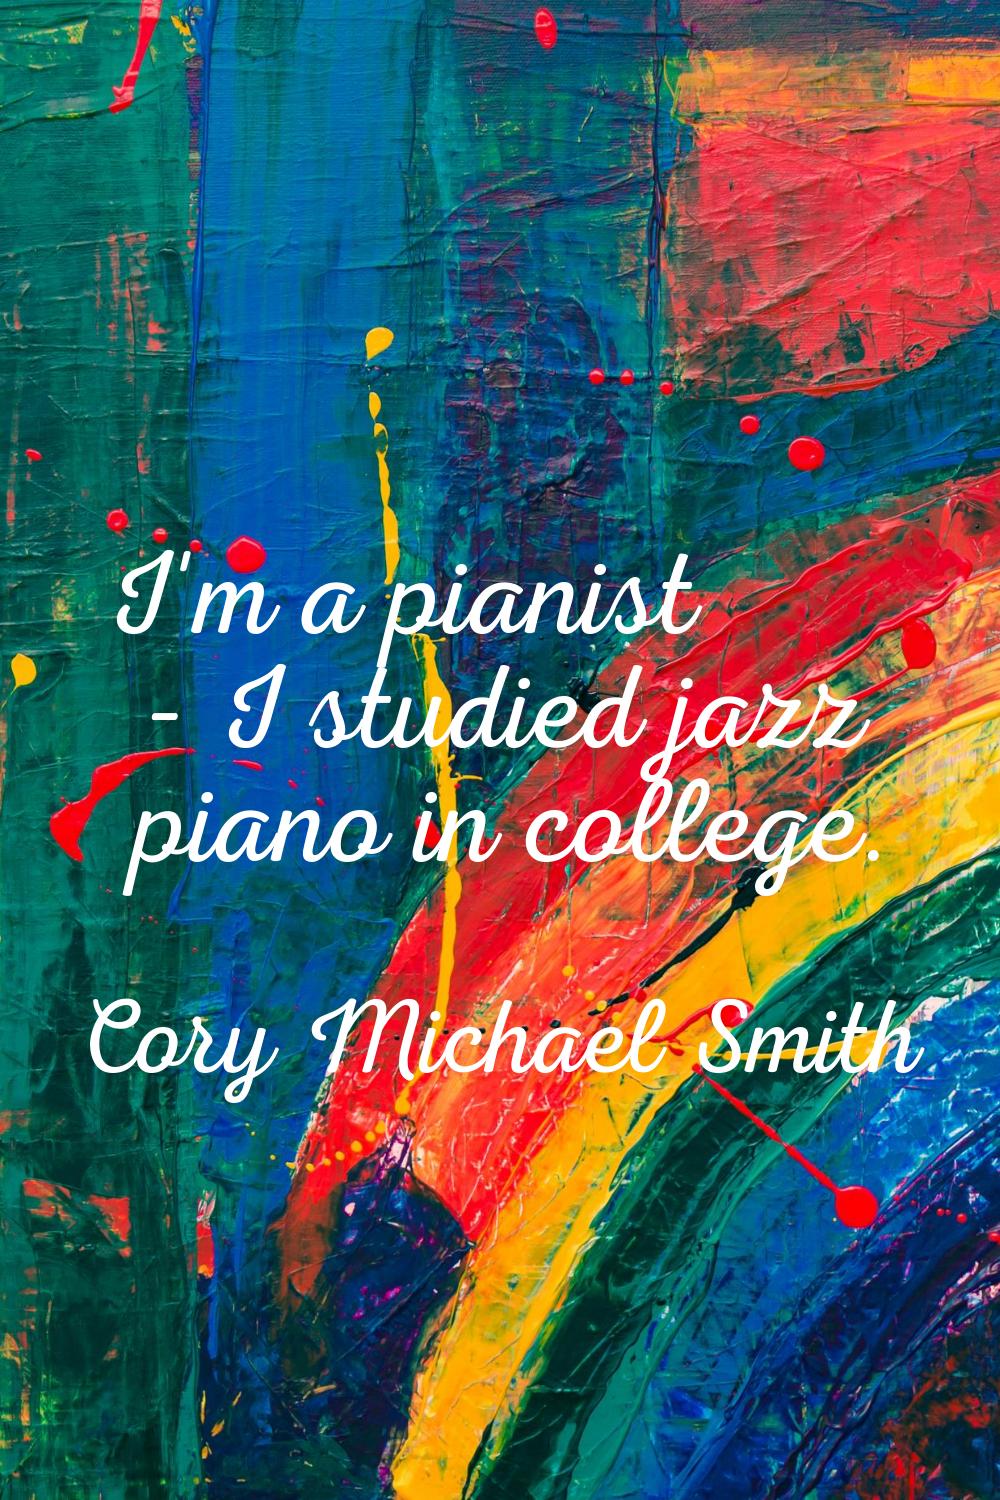 I'm a pianist - I studied jazz piano in college.